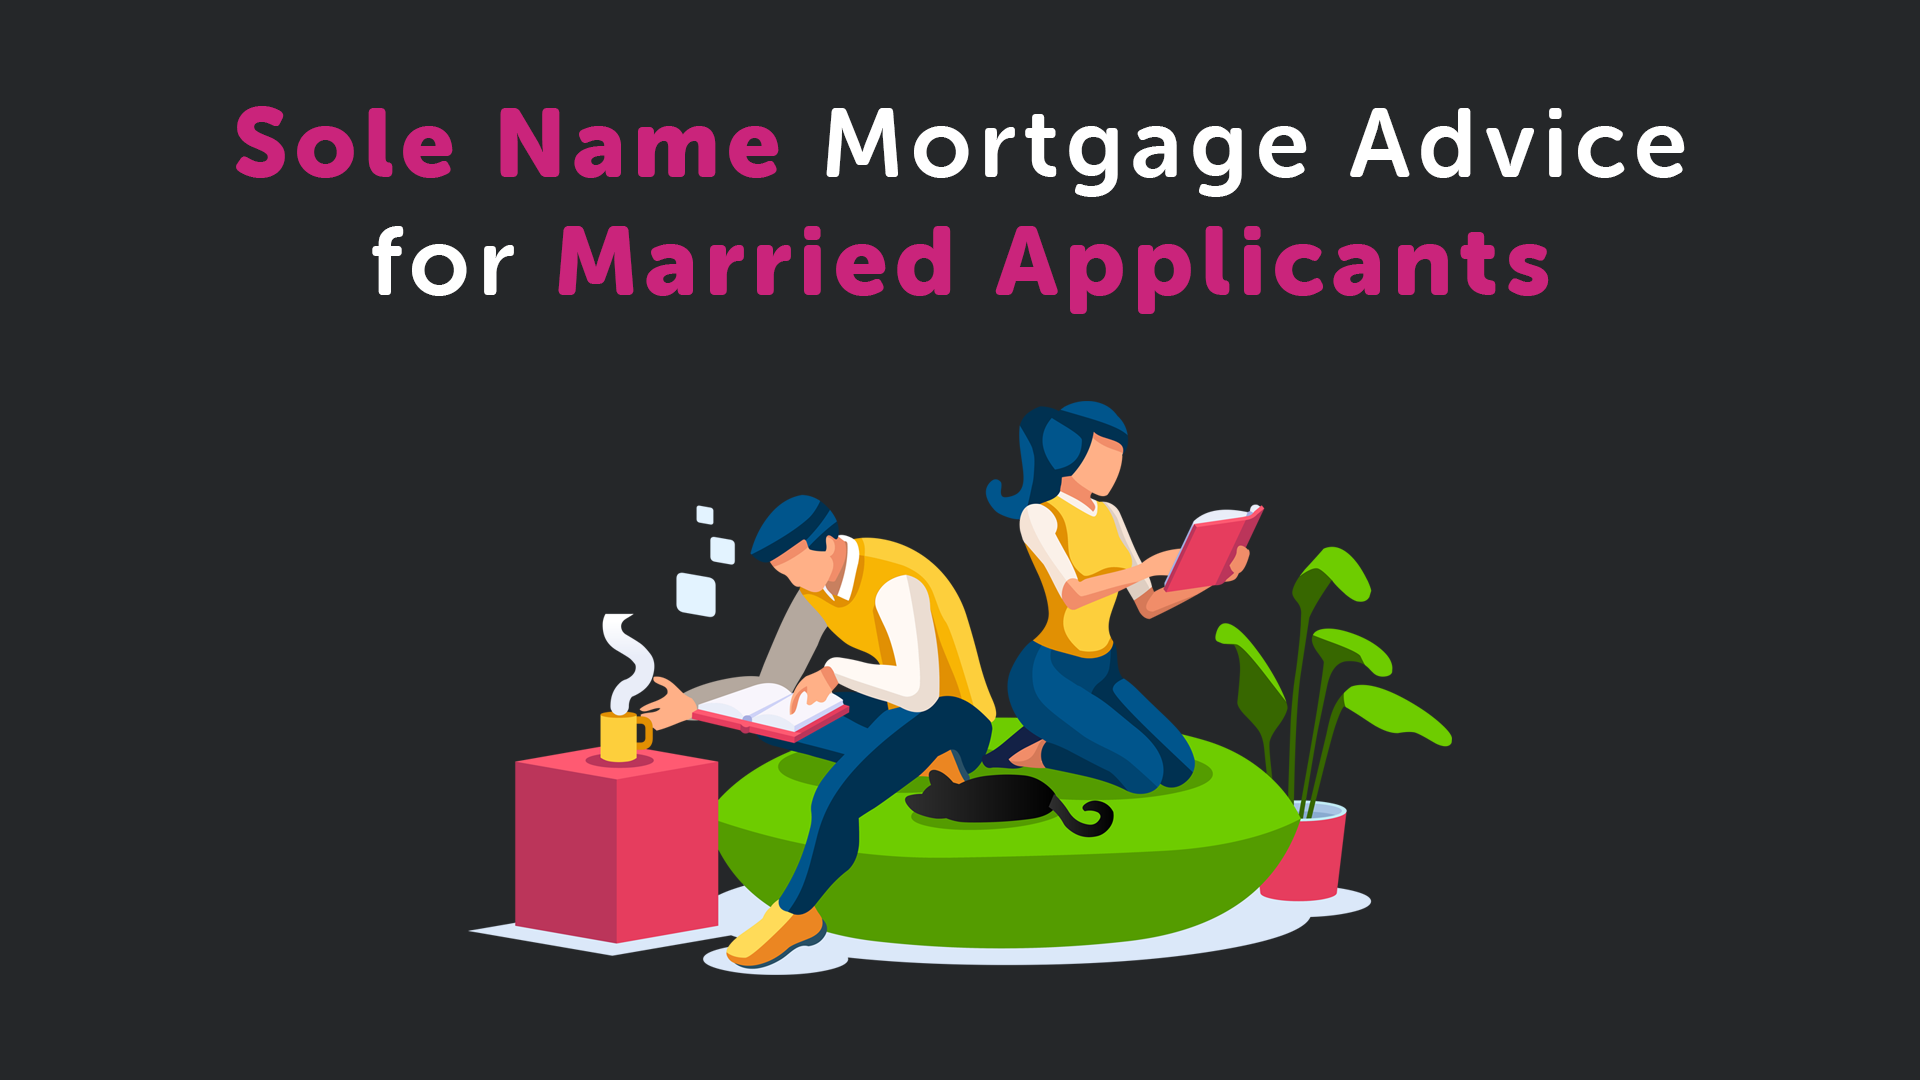 Sole Name Mortgage Advice for a Married Applicant in Birmingham